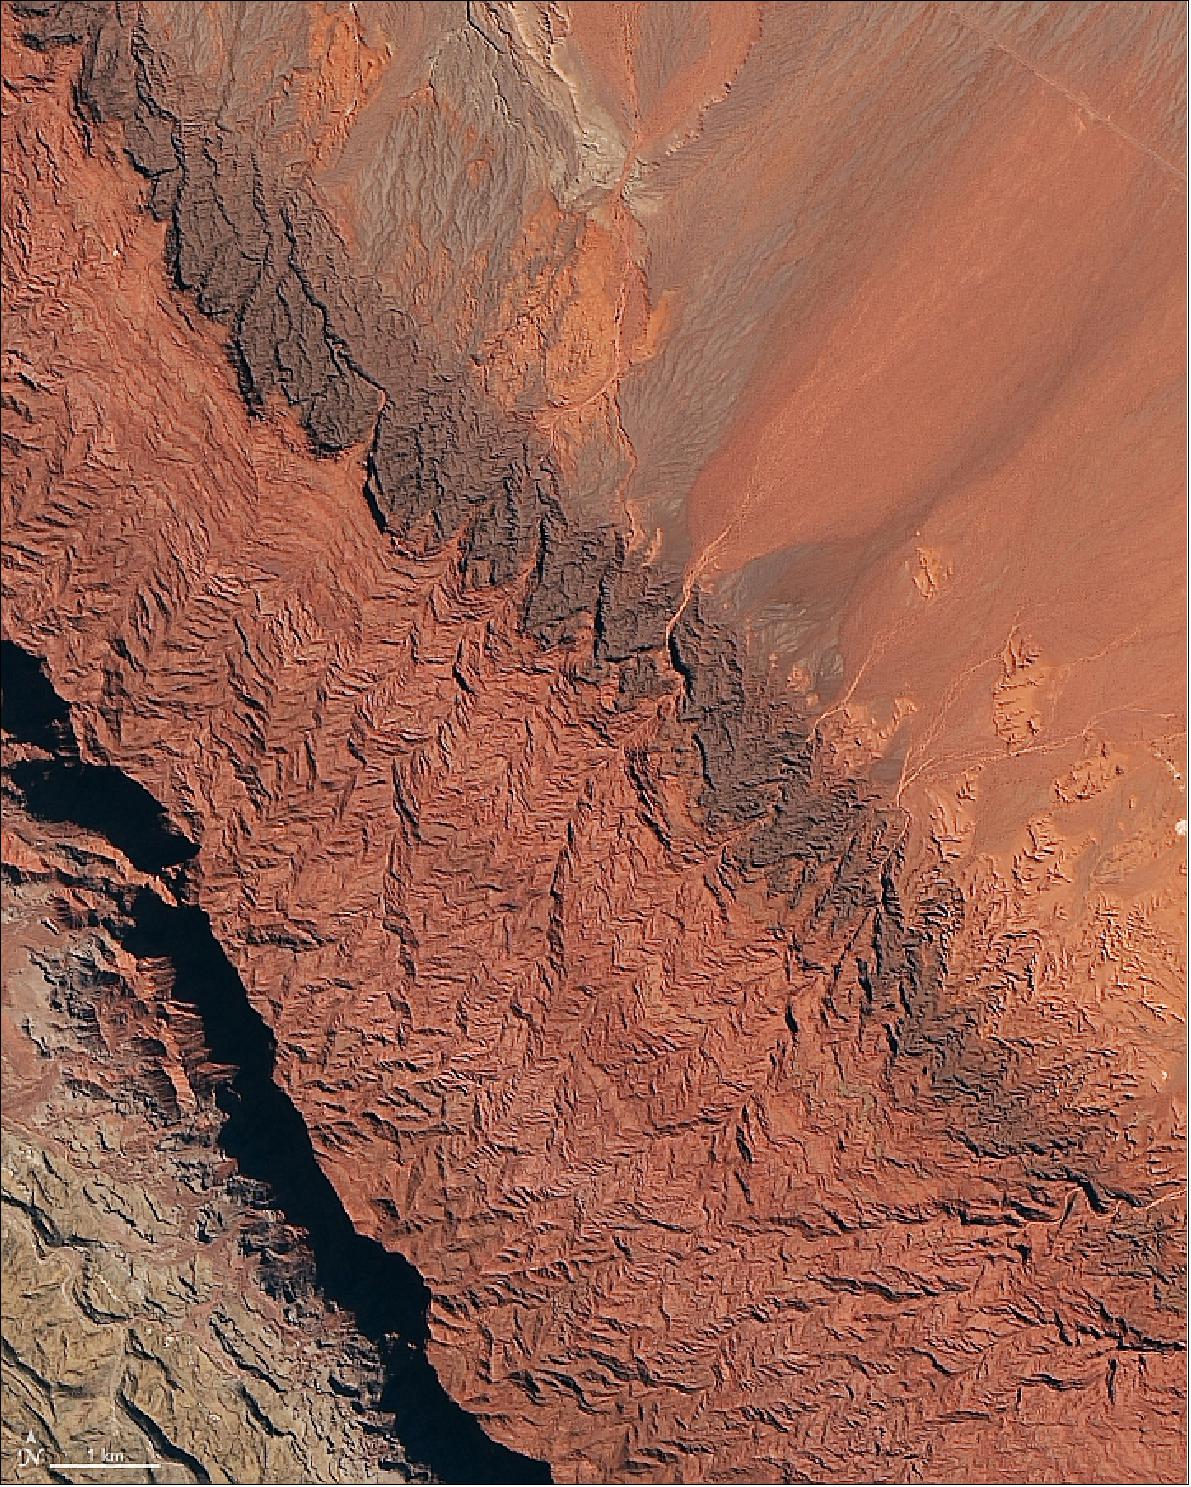 Figure 116: Image of a portion of Ischigualasto Provincial Park, acquired by OLI on 25 August 2018 (image credit: NASA Earth Observatory, image by Lauren Dauphin, using Landsat data from the U.S. Geological Survey. Story by Kasha Patel)